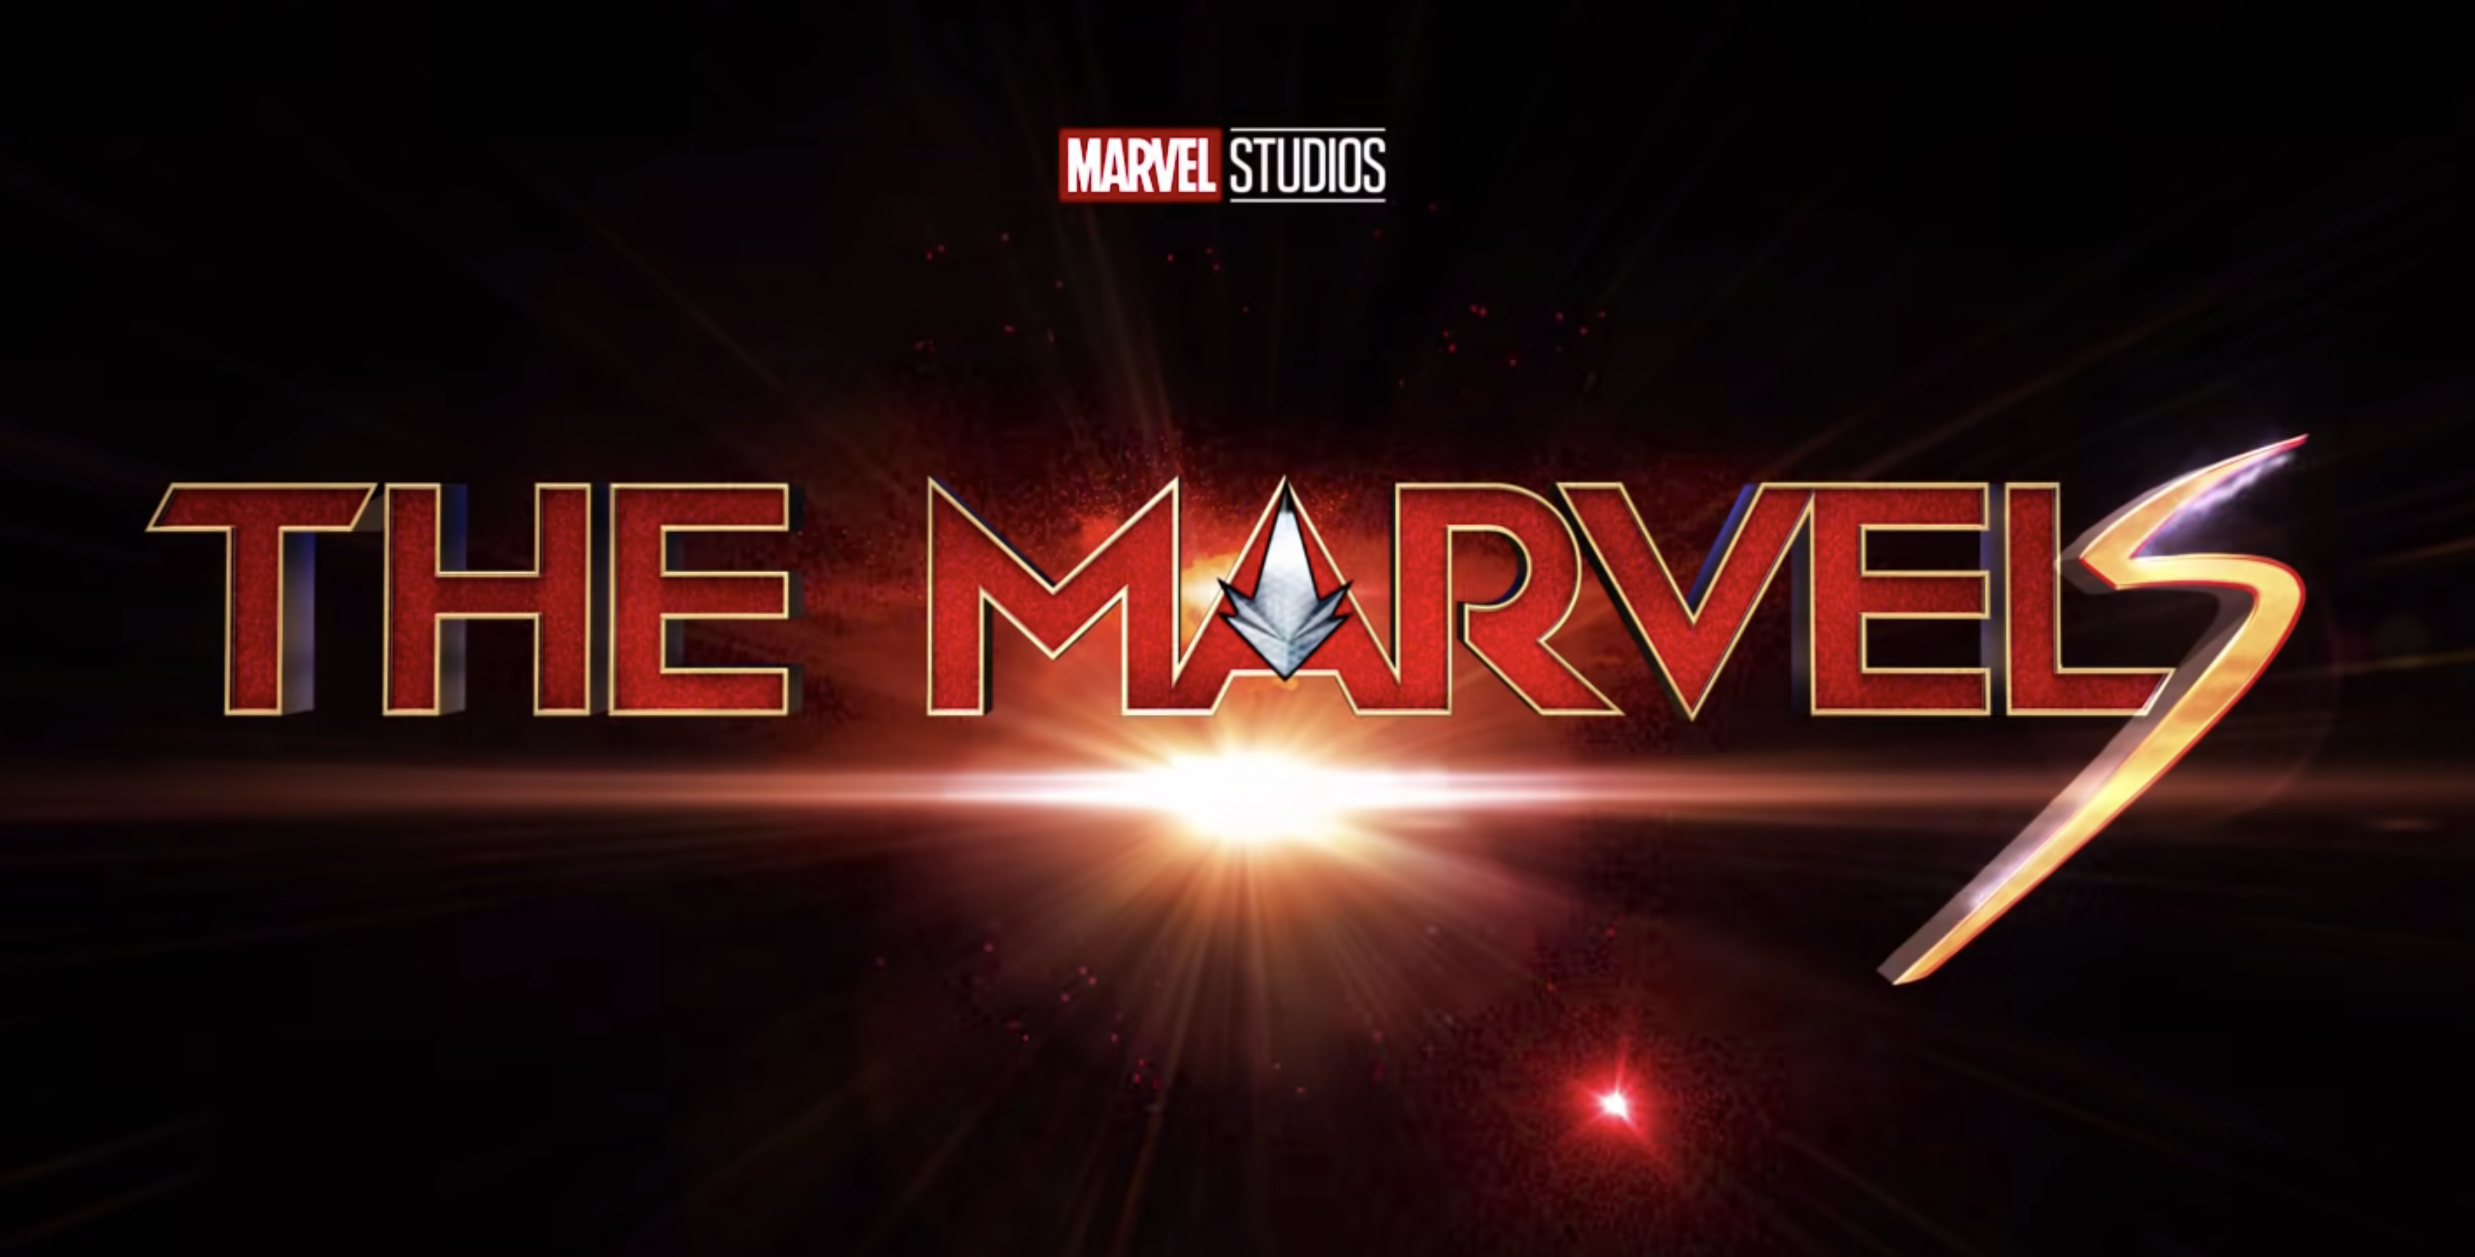 The logo for The Marvels, one of the upcoming marvel movies